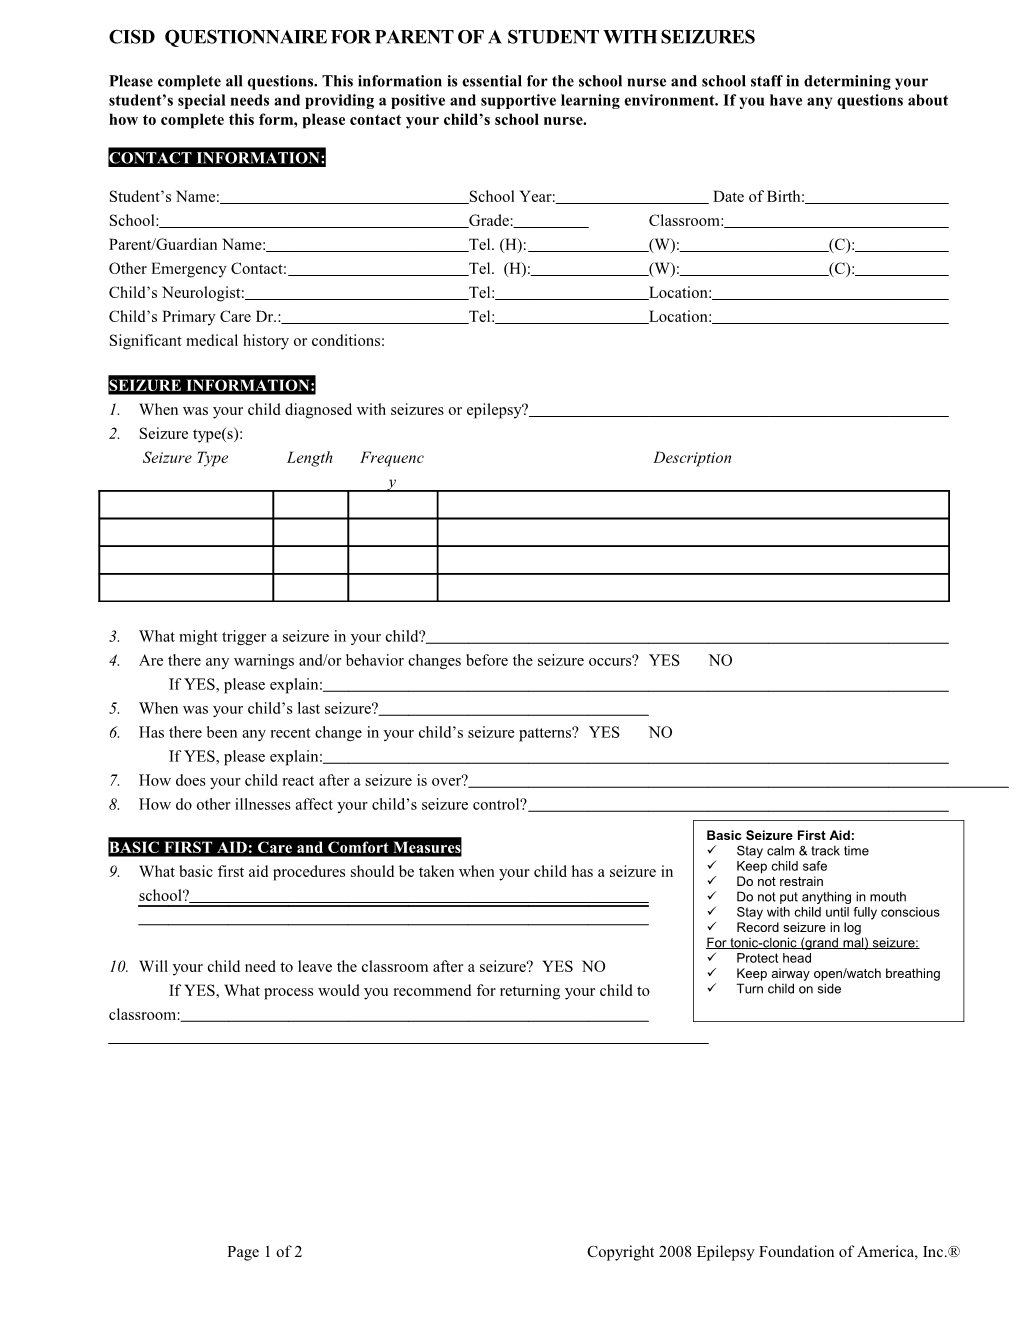 Questionnaire for Parents of Child with Epilepsy